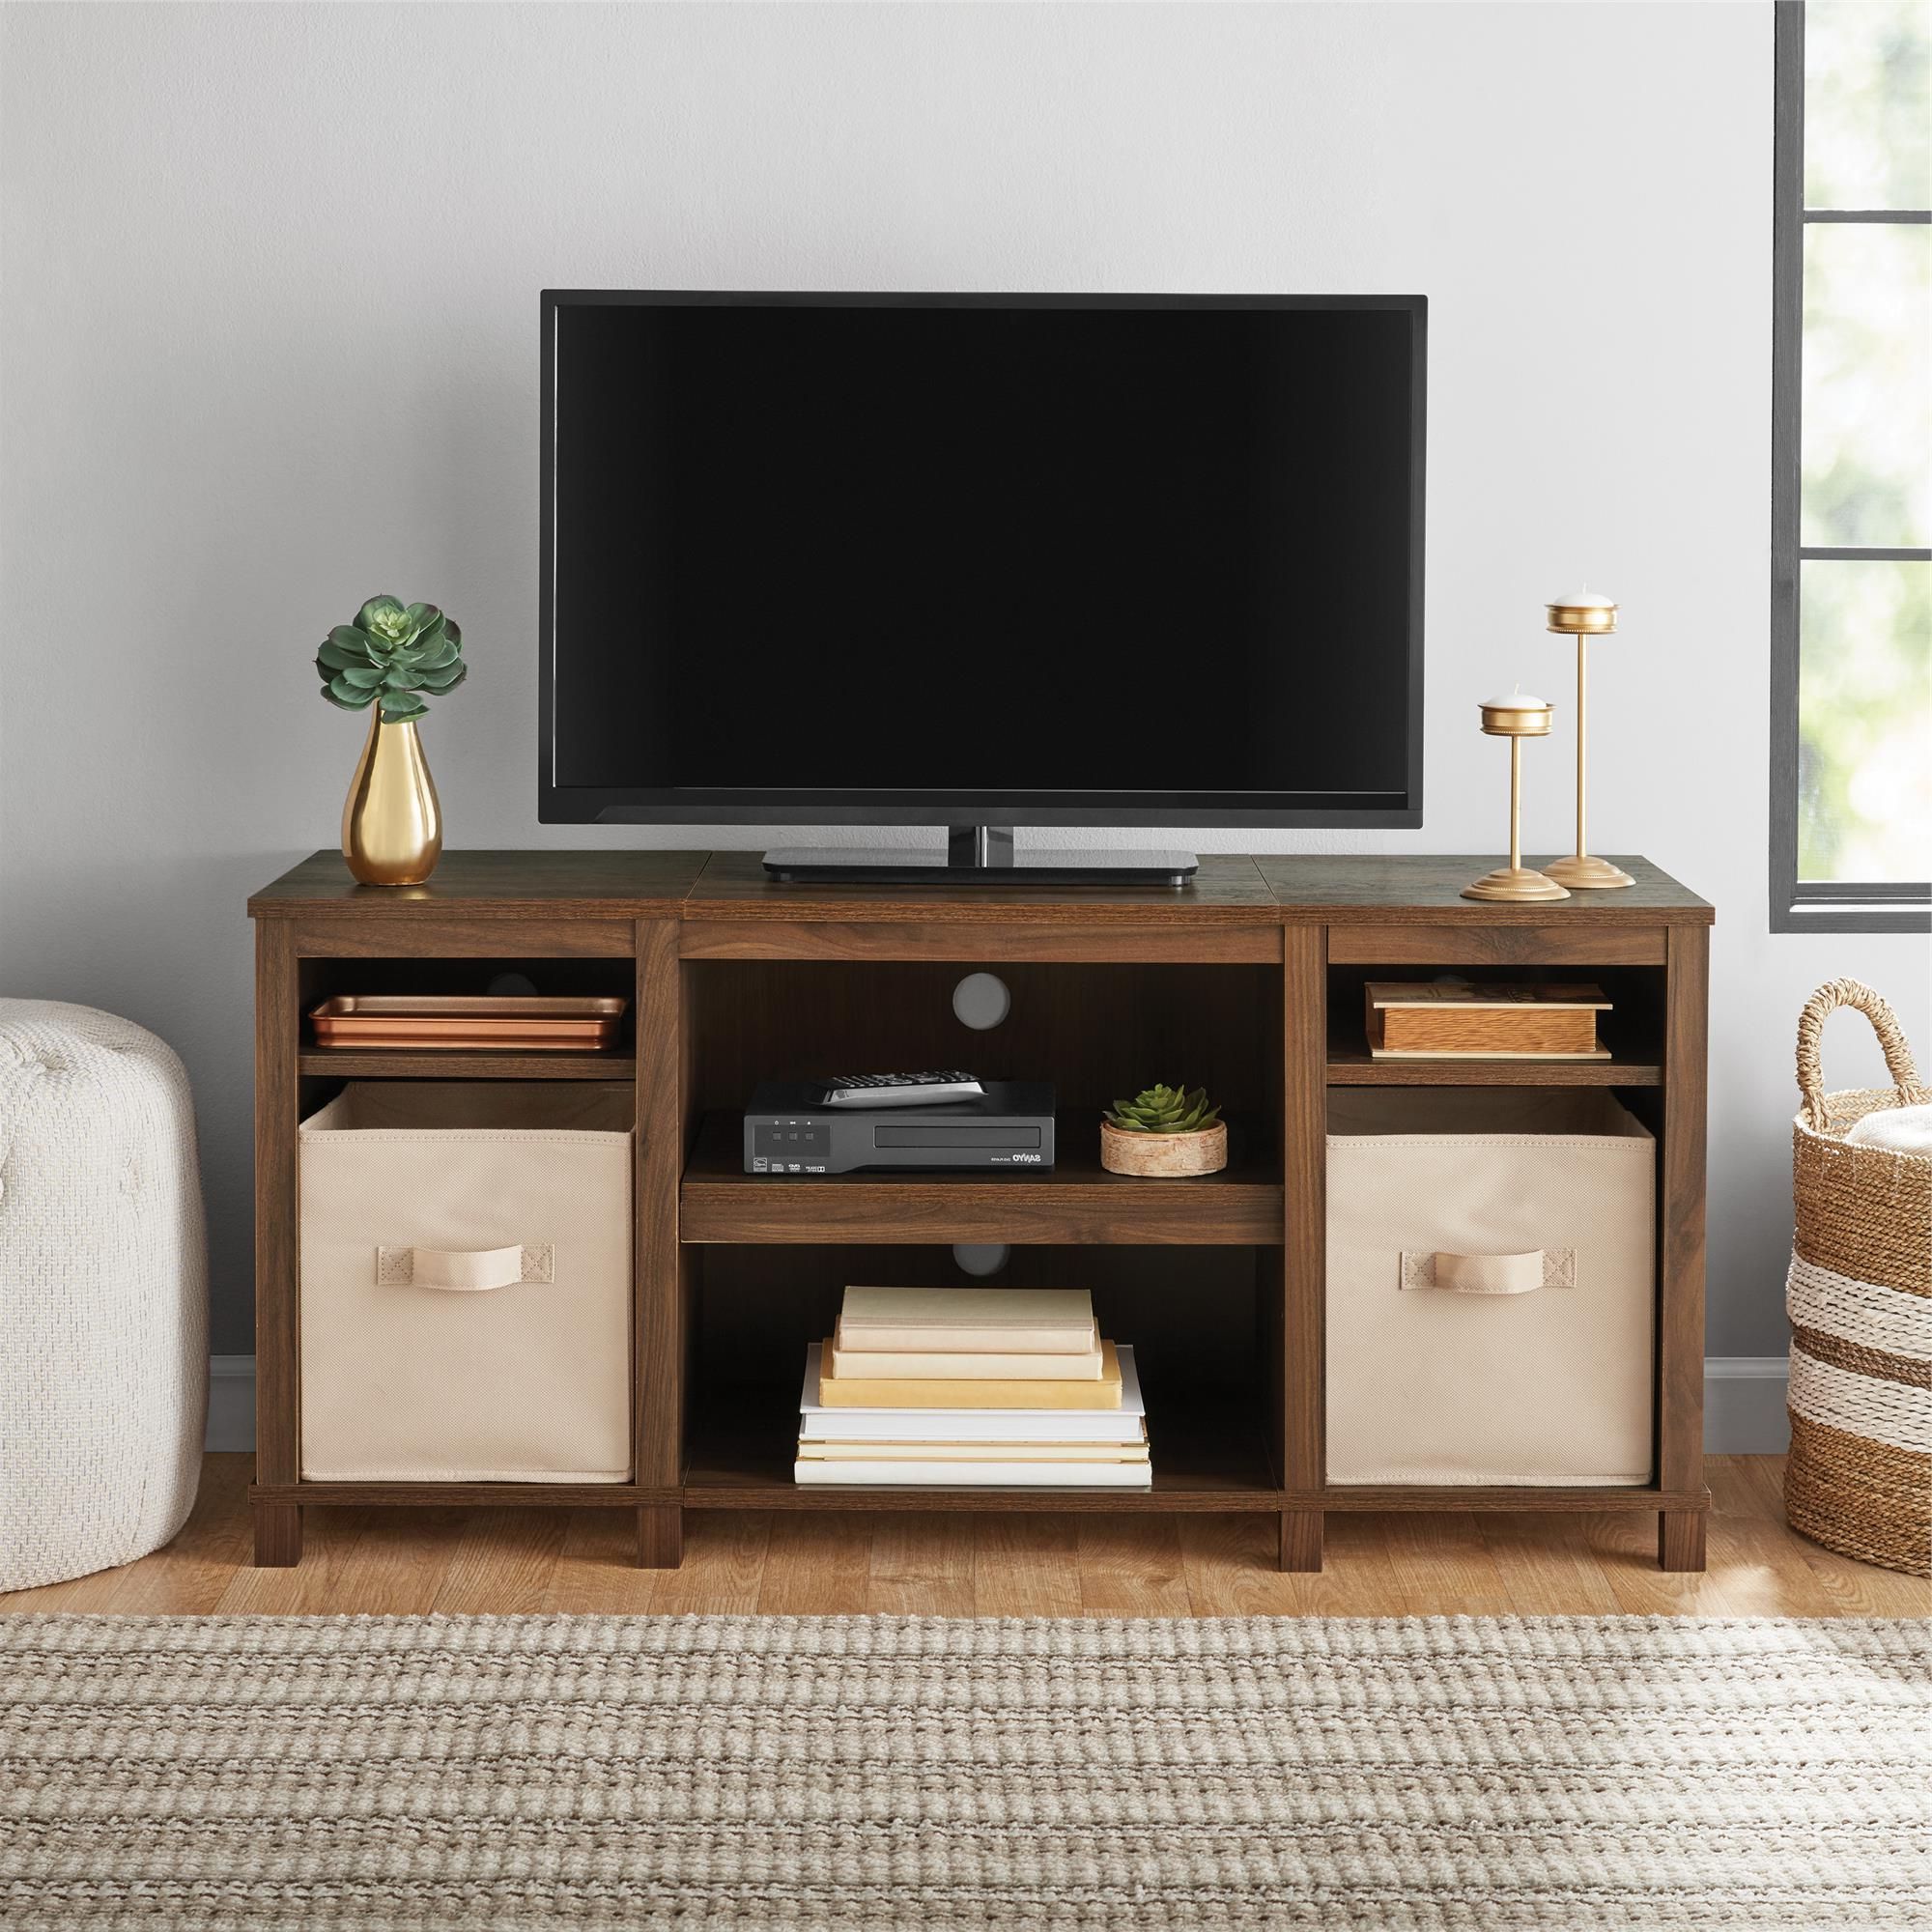 Mainstays Parsons Cubby Tv Stand For Tvs Up To 50", Walnut Intended For Tv Stands For Tvs Up To 50" (View 2 of 20)